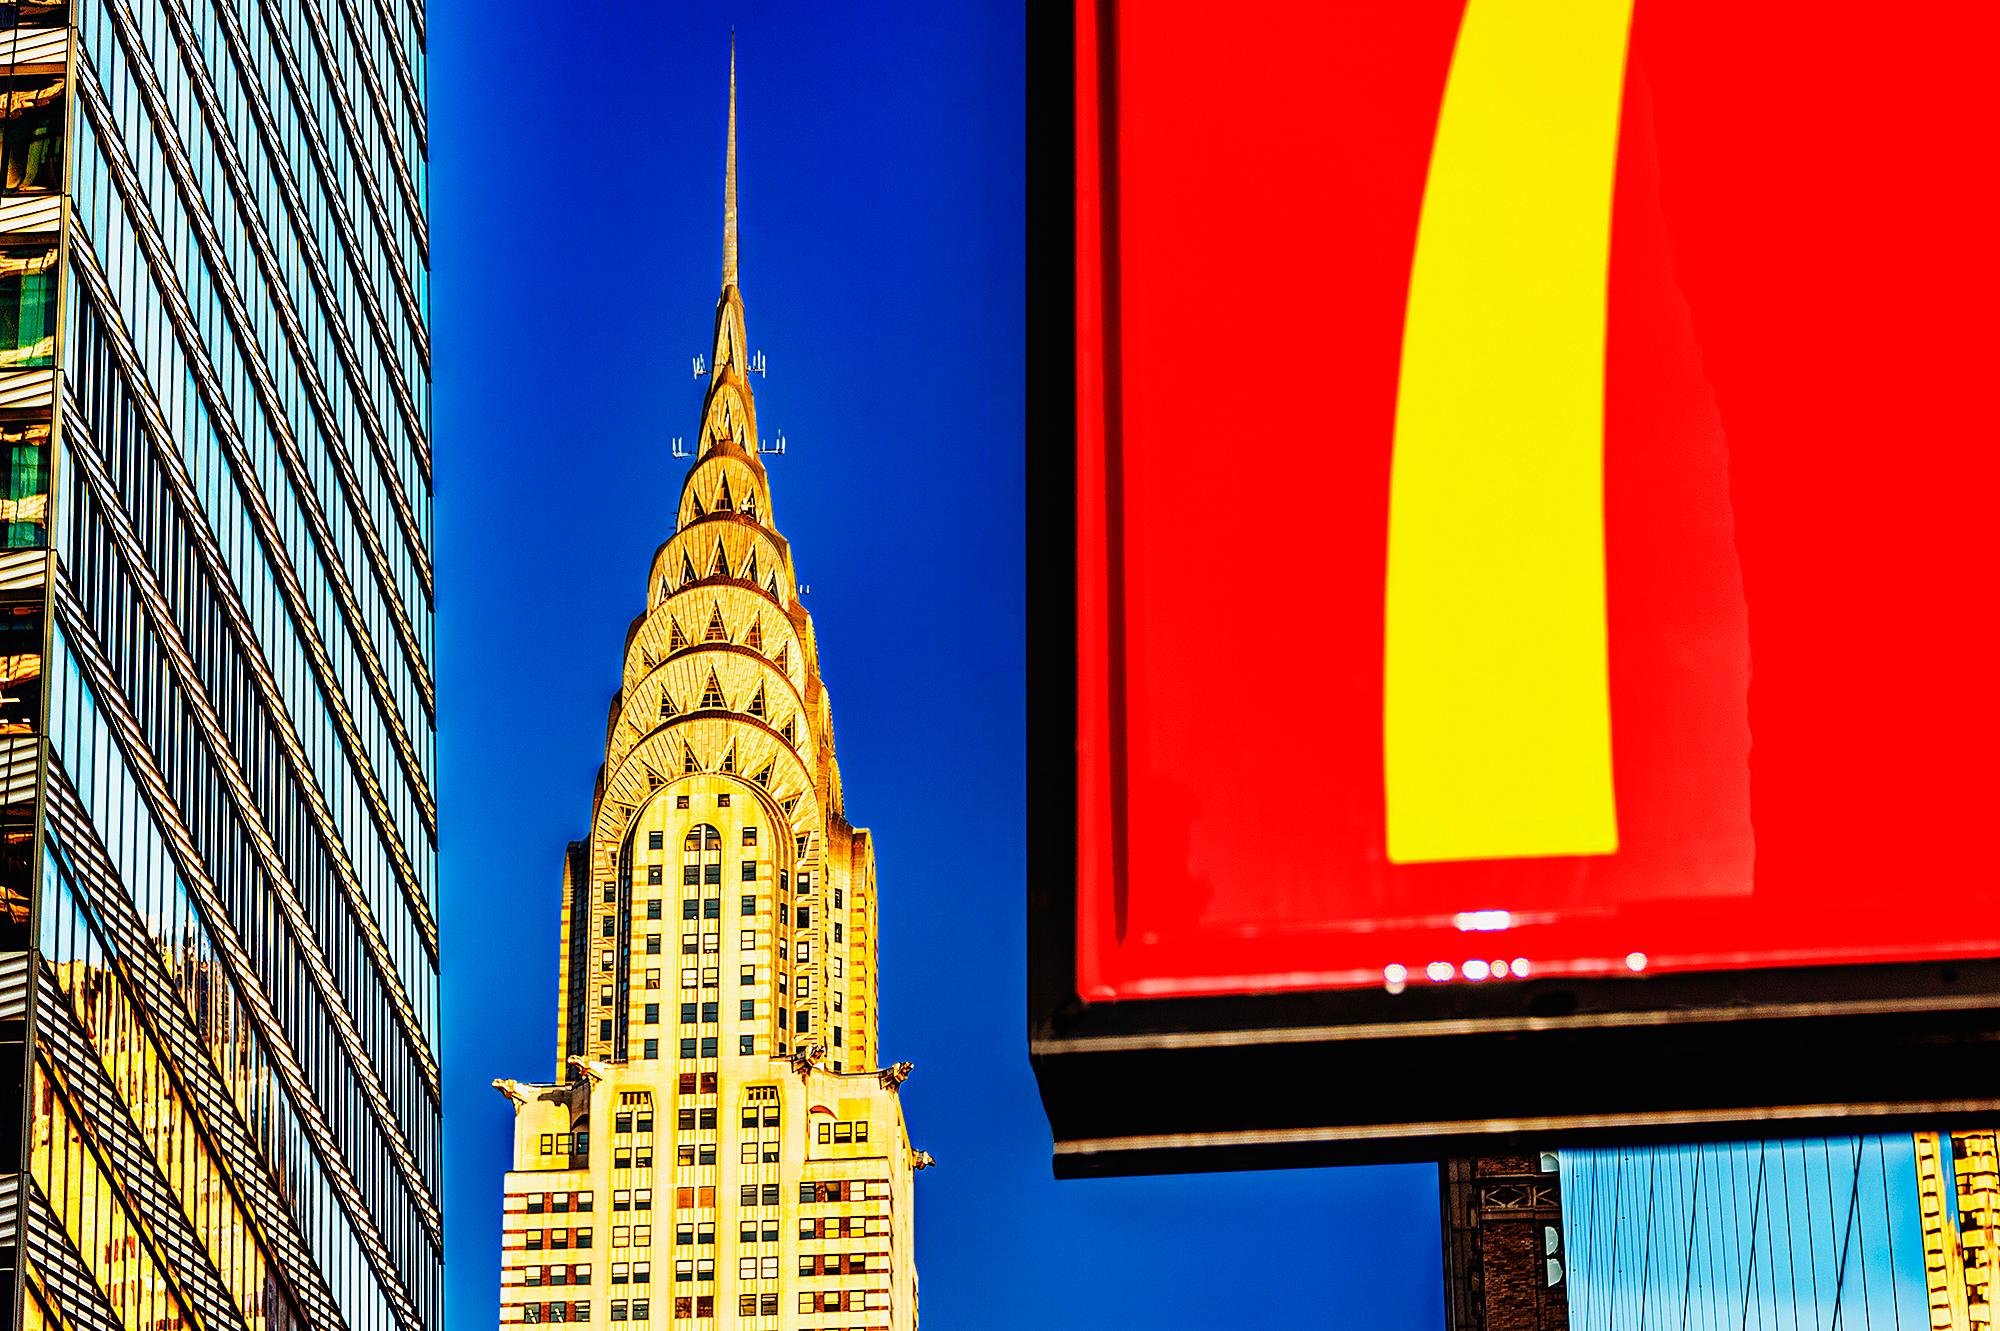 Chrysler Building Spire and McDonald's Graphic Red Sign